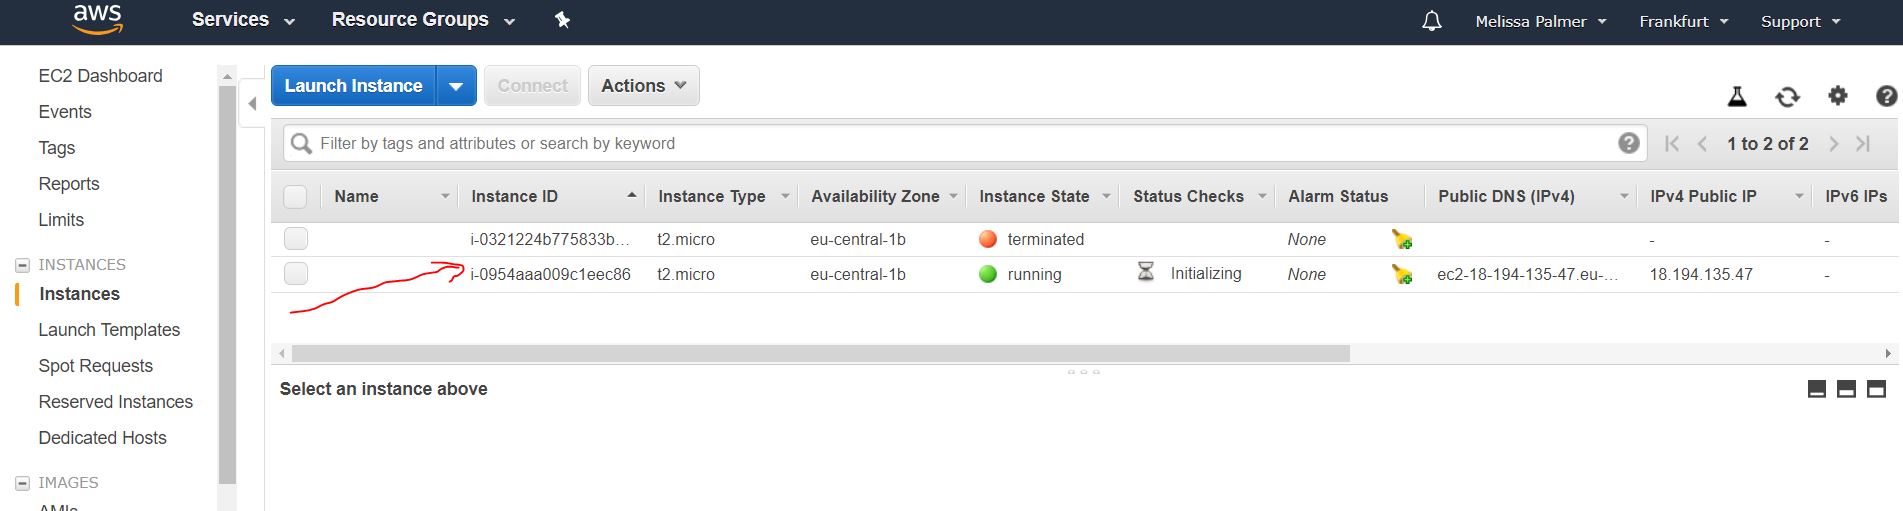 AWS New Instance